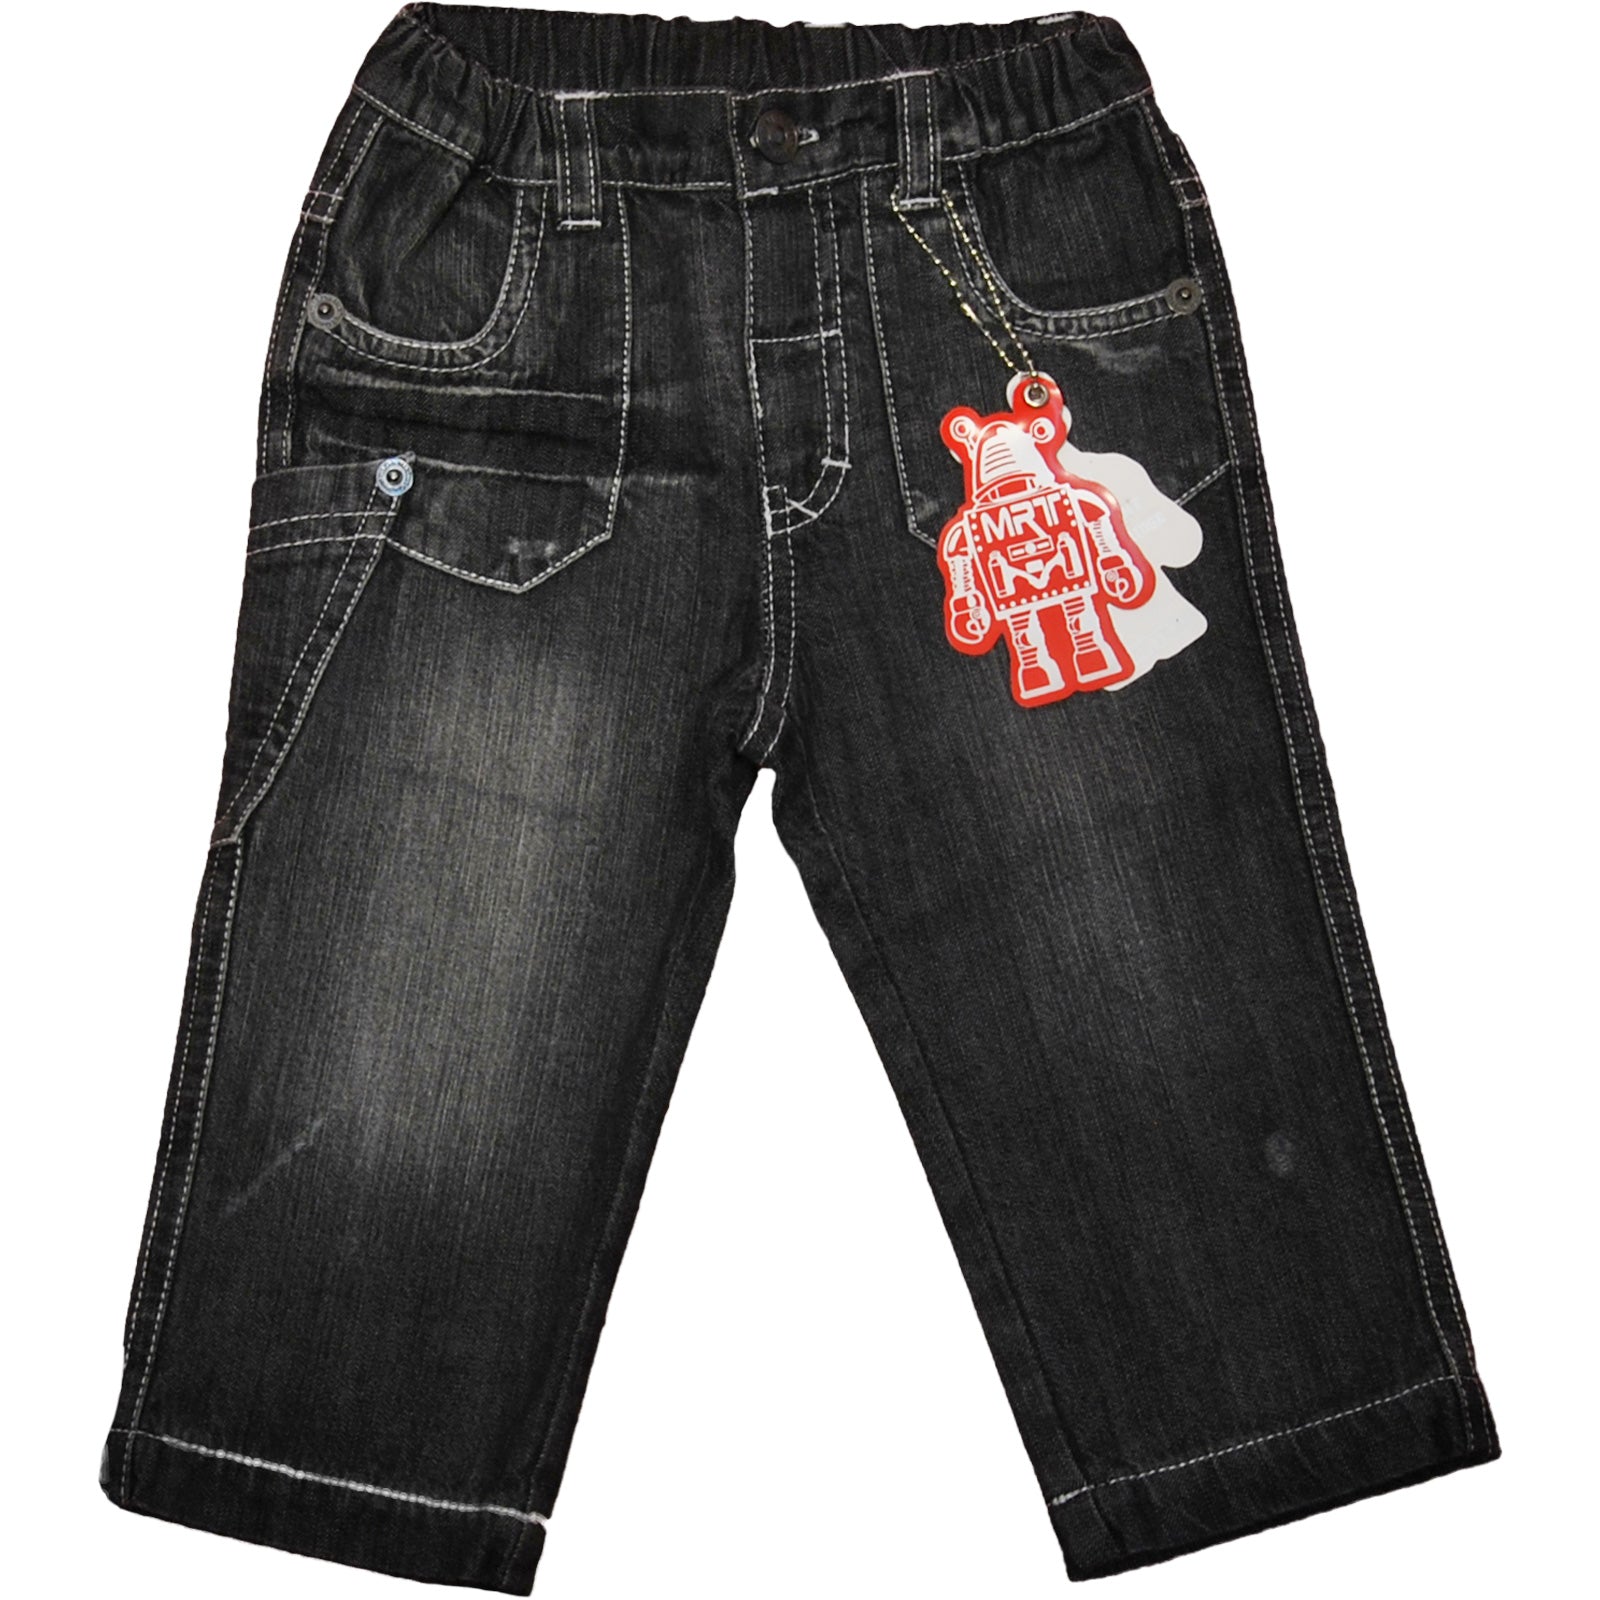 
  Trousers from the children's clothing line Mirtillo denim, with side pocket, dark wash; inner ...